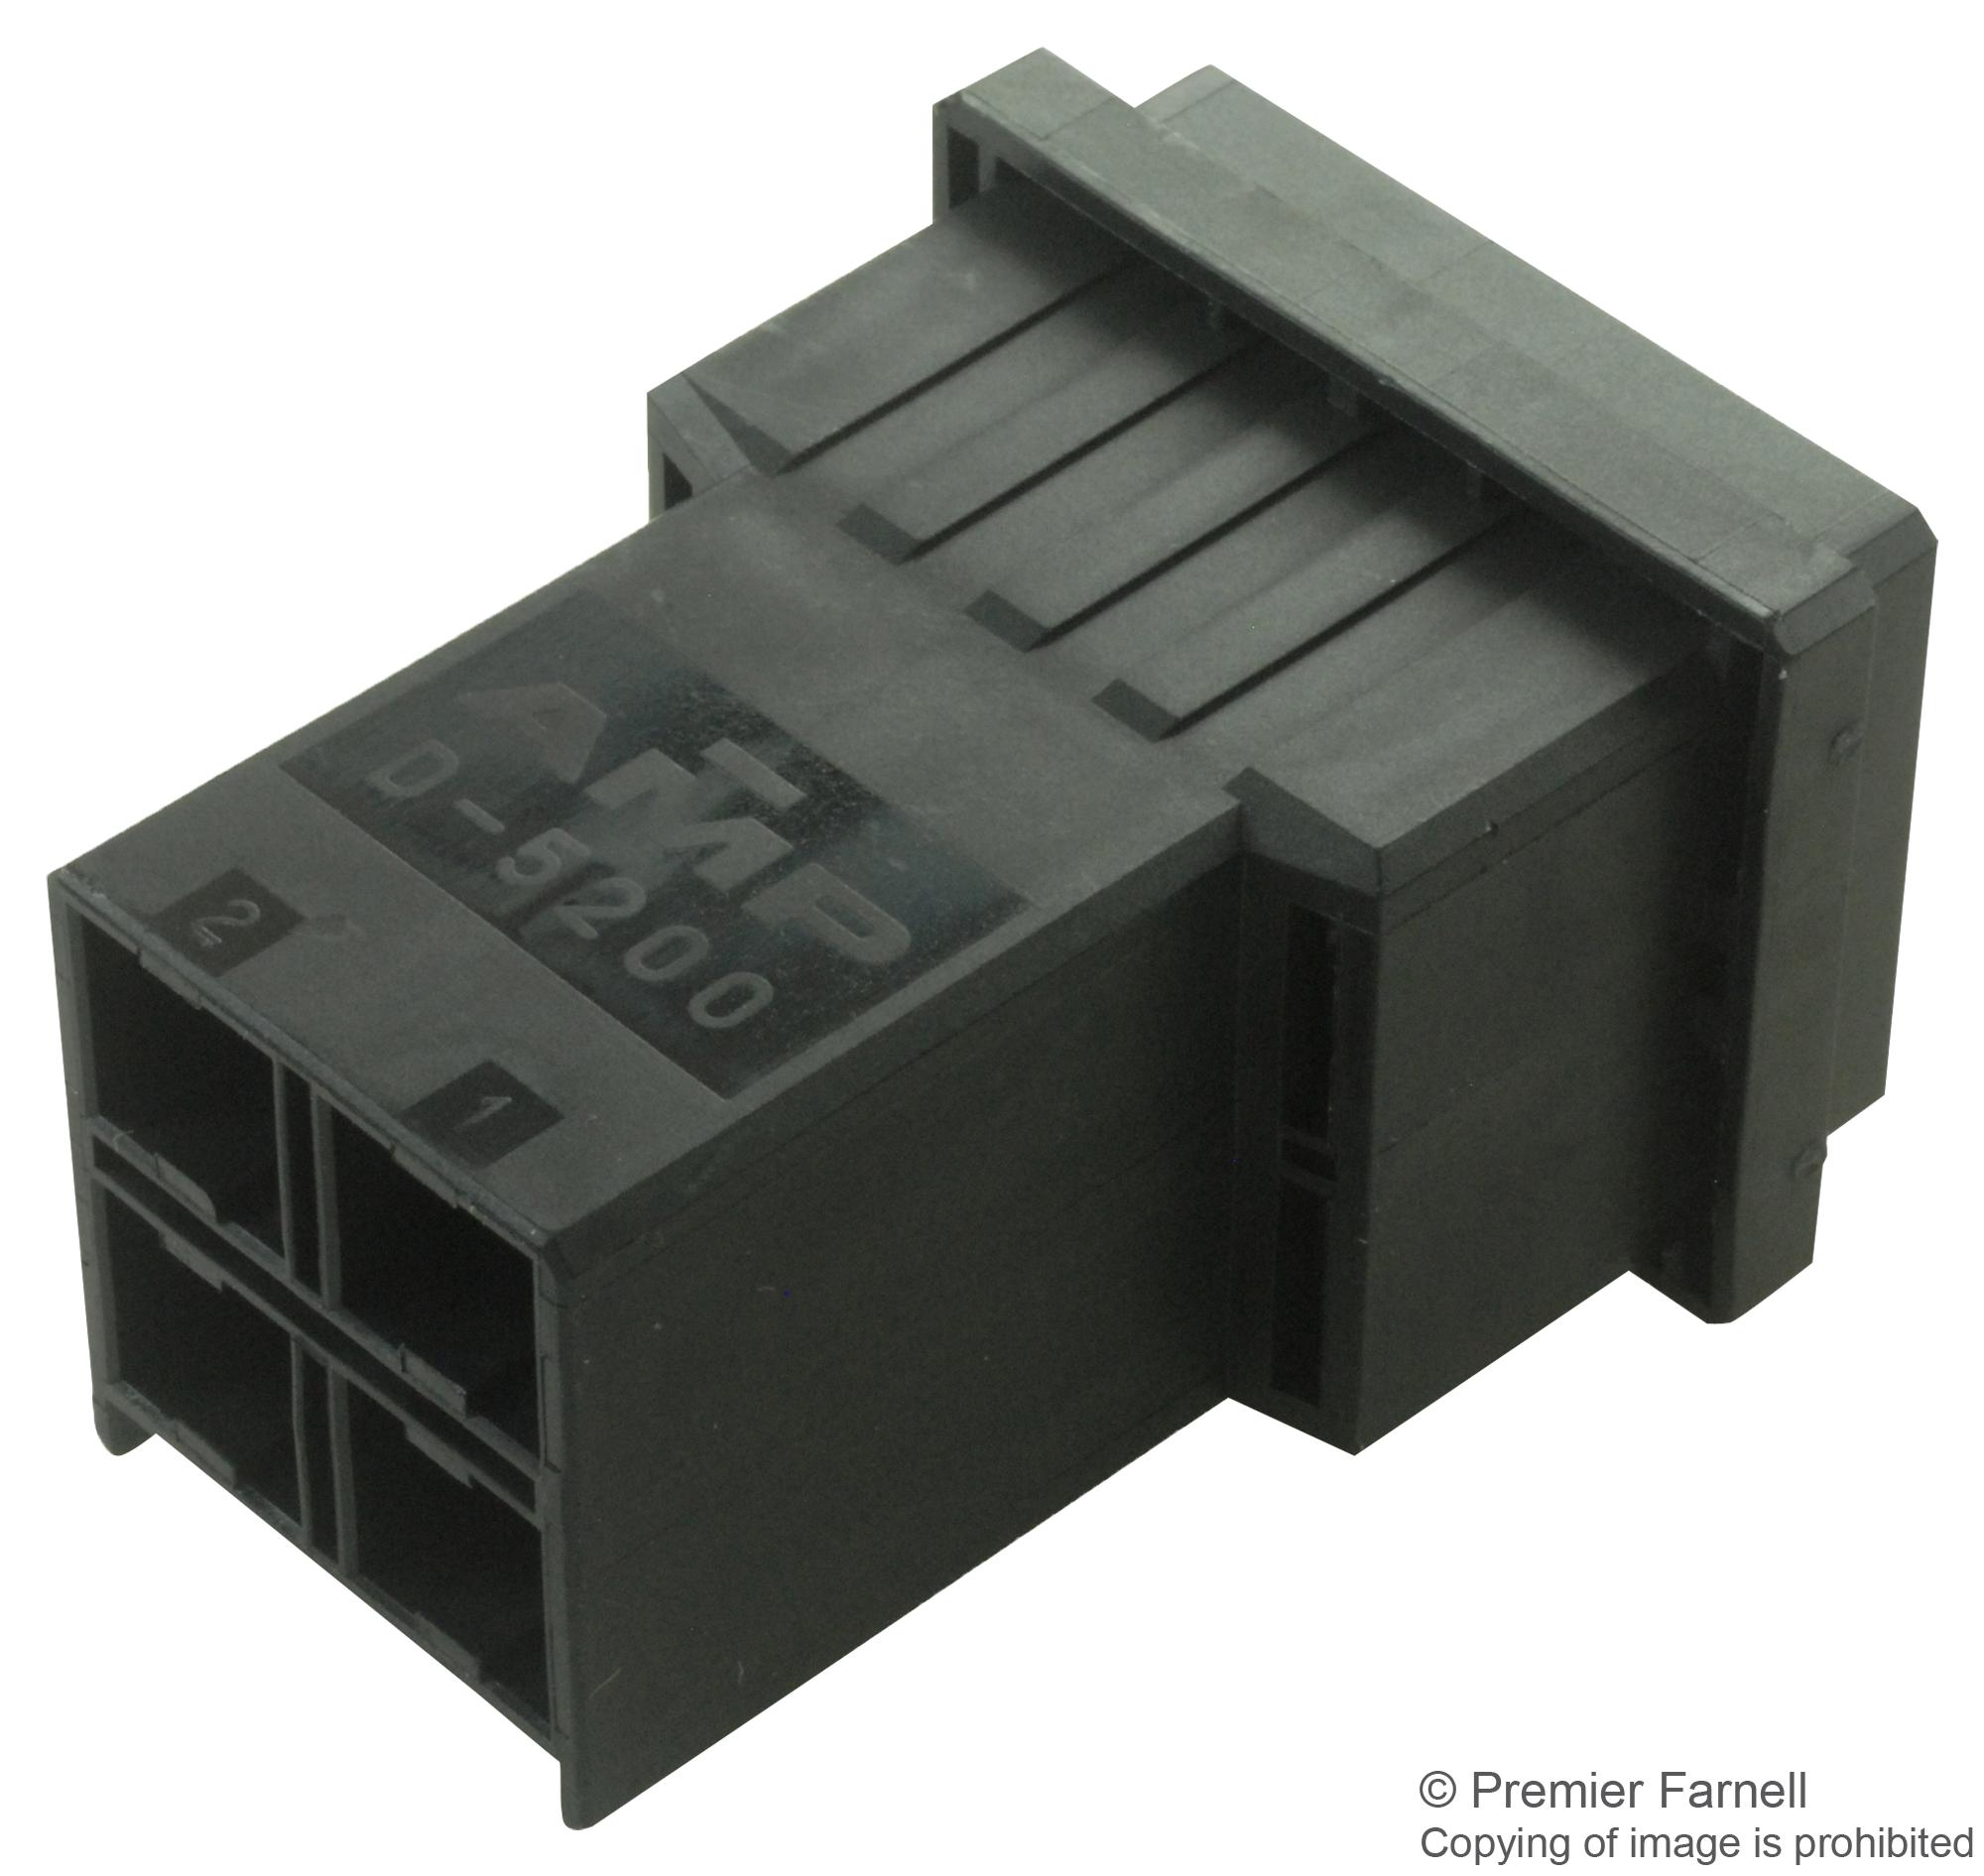 2-917809-2 CONNECTOR HOUSING, PLUG, 4POS, 10.16MM AMP - TE CONNECTIVITY